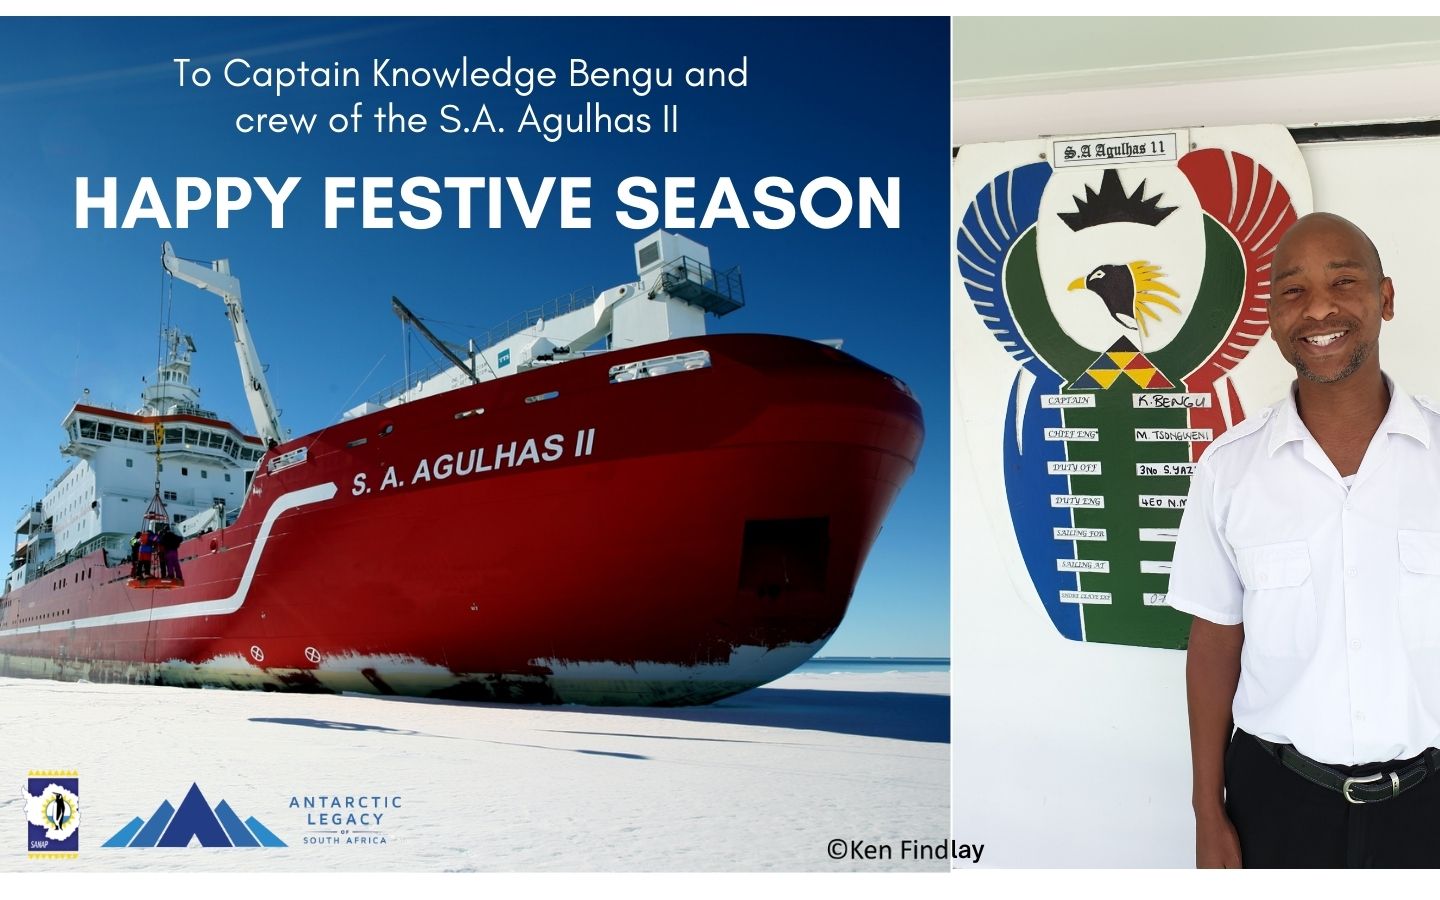 Happy Festive Season to all onboard the S.A. Agulhas II